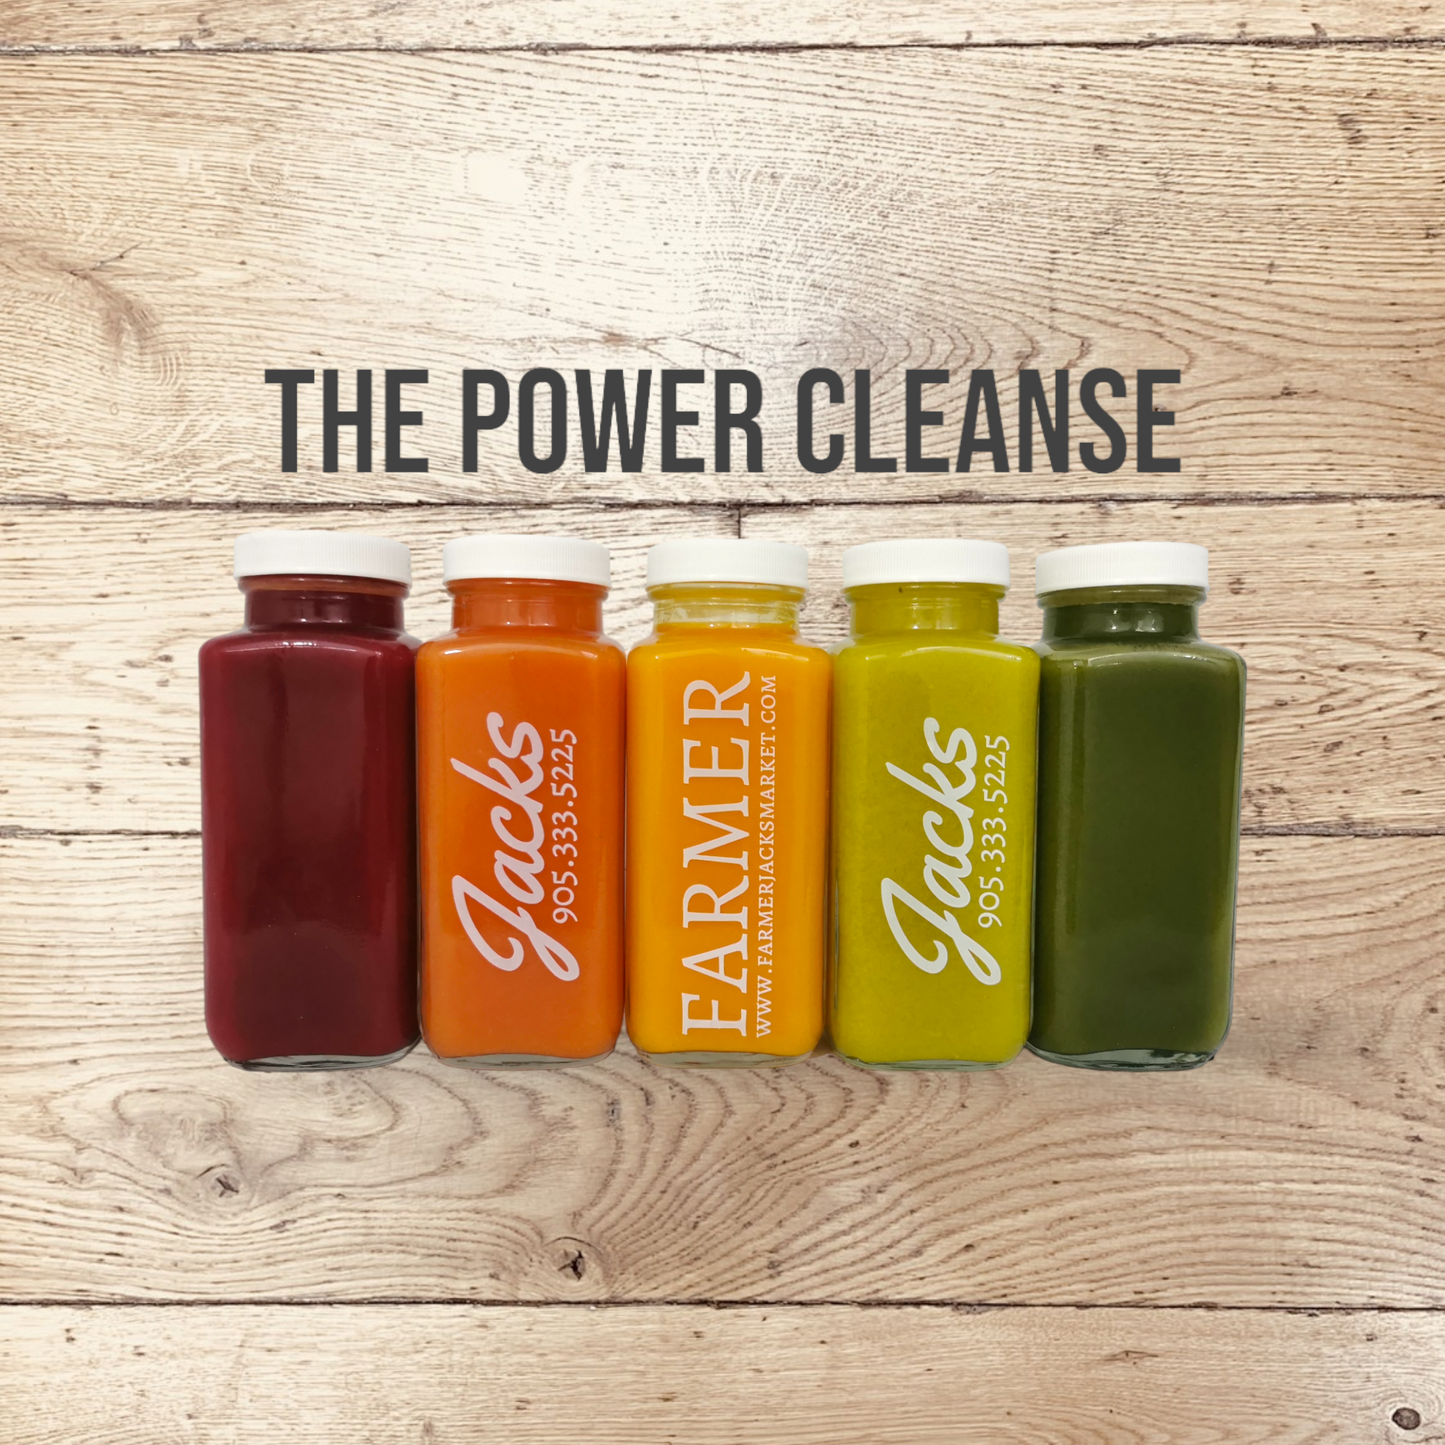 Power Cleanse